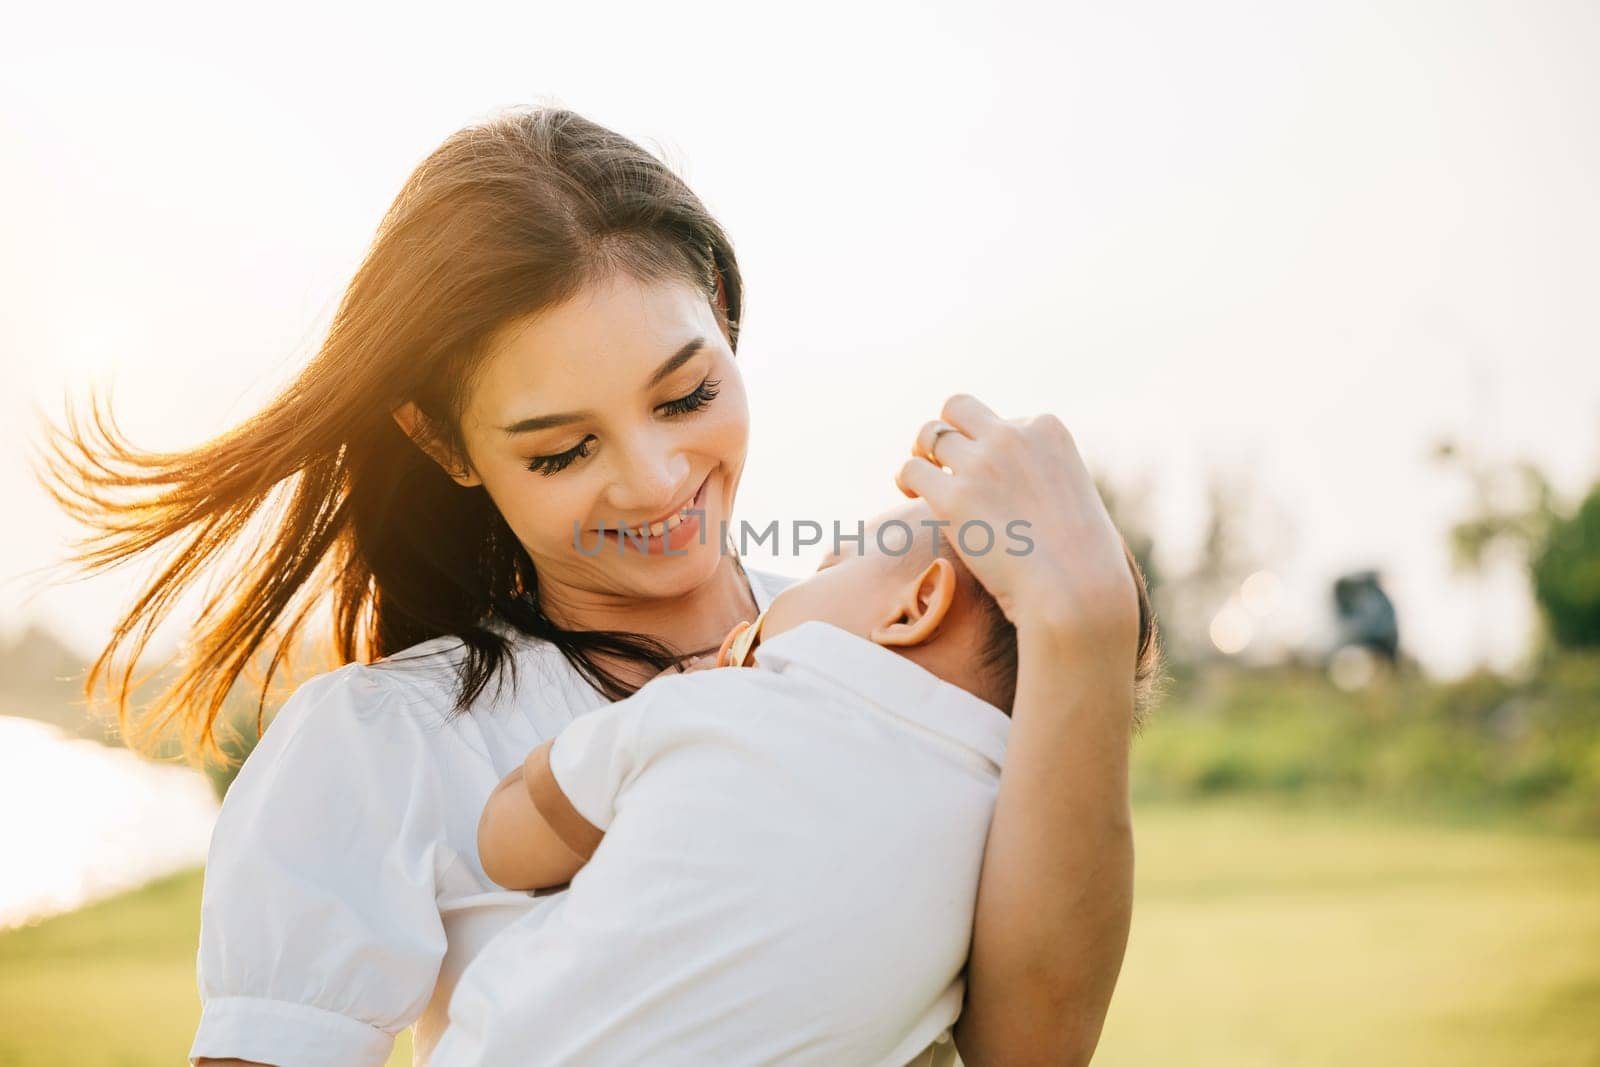 Portrait of a contented mother holding her sleeping son in a serene garden. Her face beams with joy and happiness as she takes in beauty of outdoors with her newborn. A moment of family care and bliss